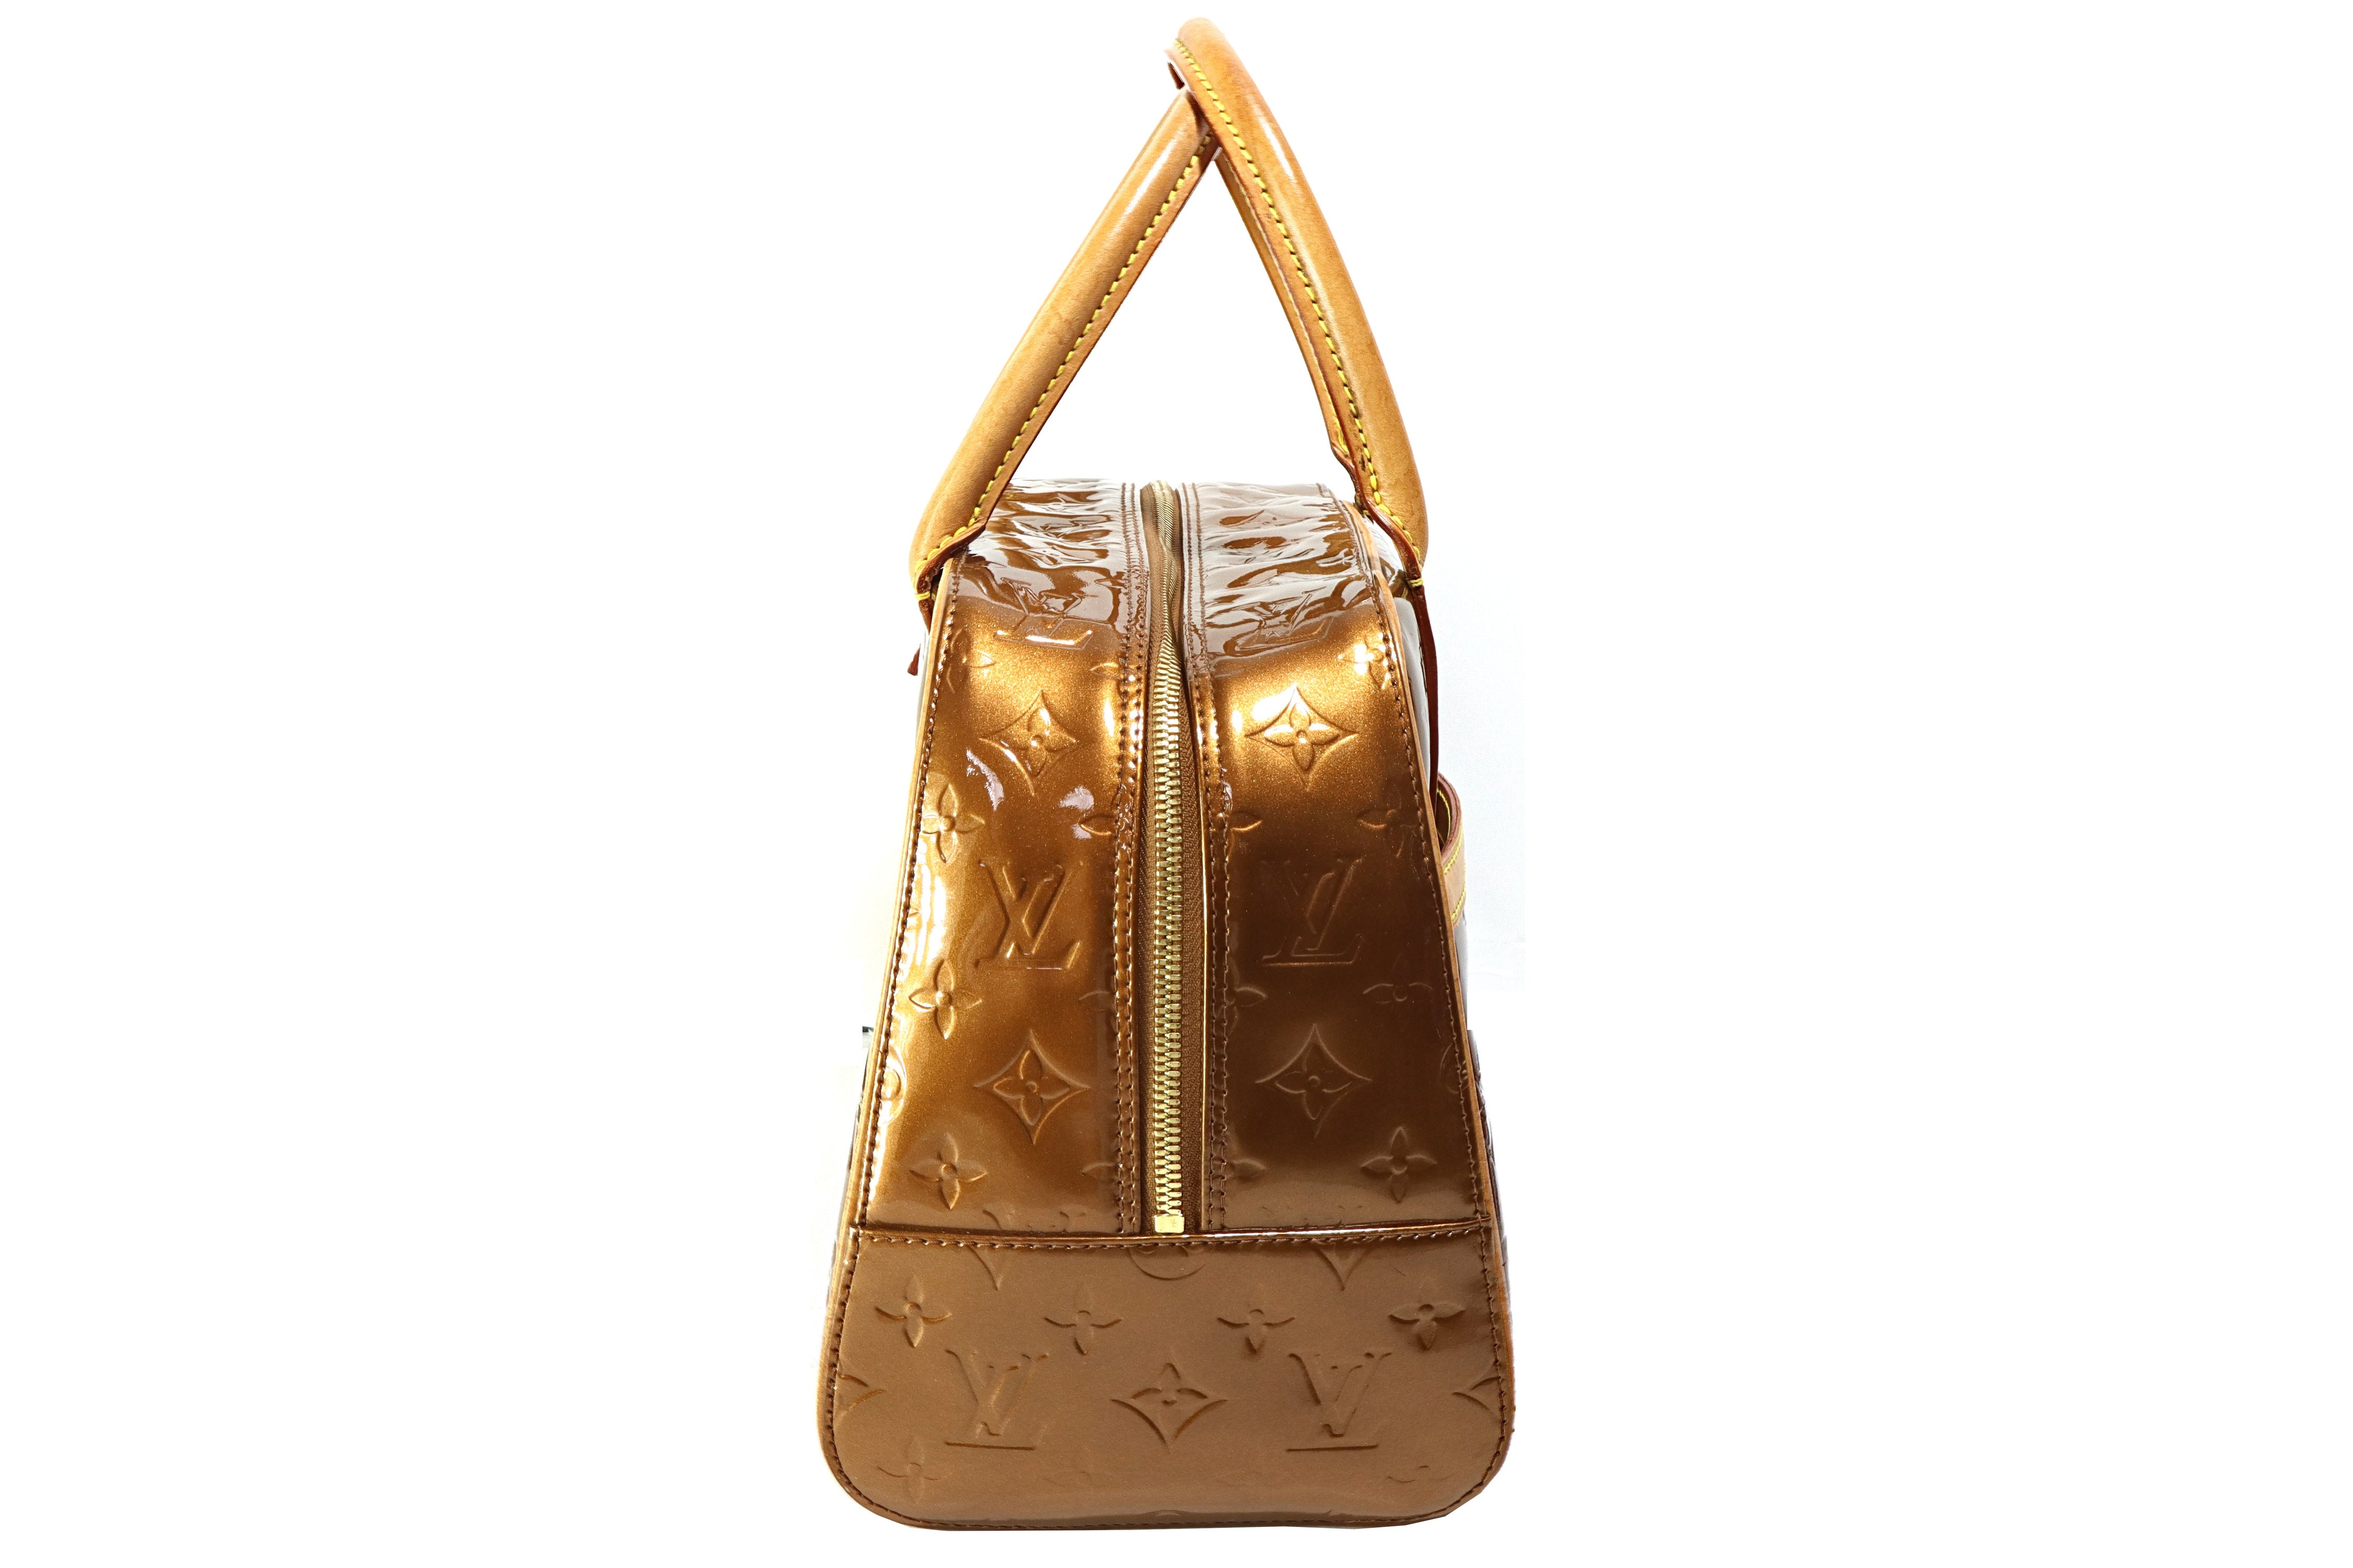 Louis Vuitton Vernis Tompkins Square Bag – QUEEN MAY